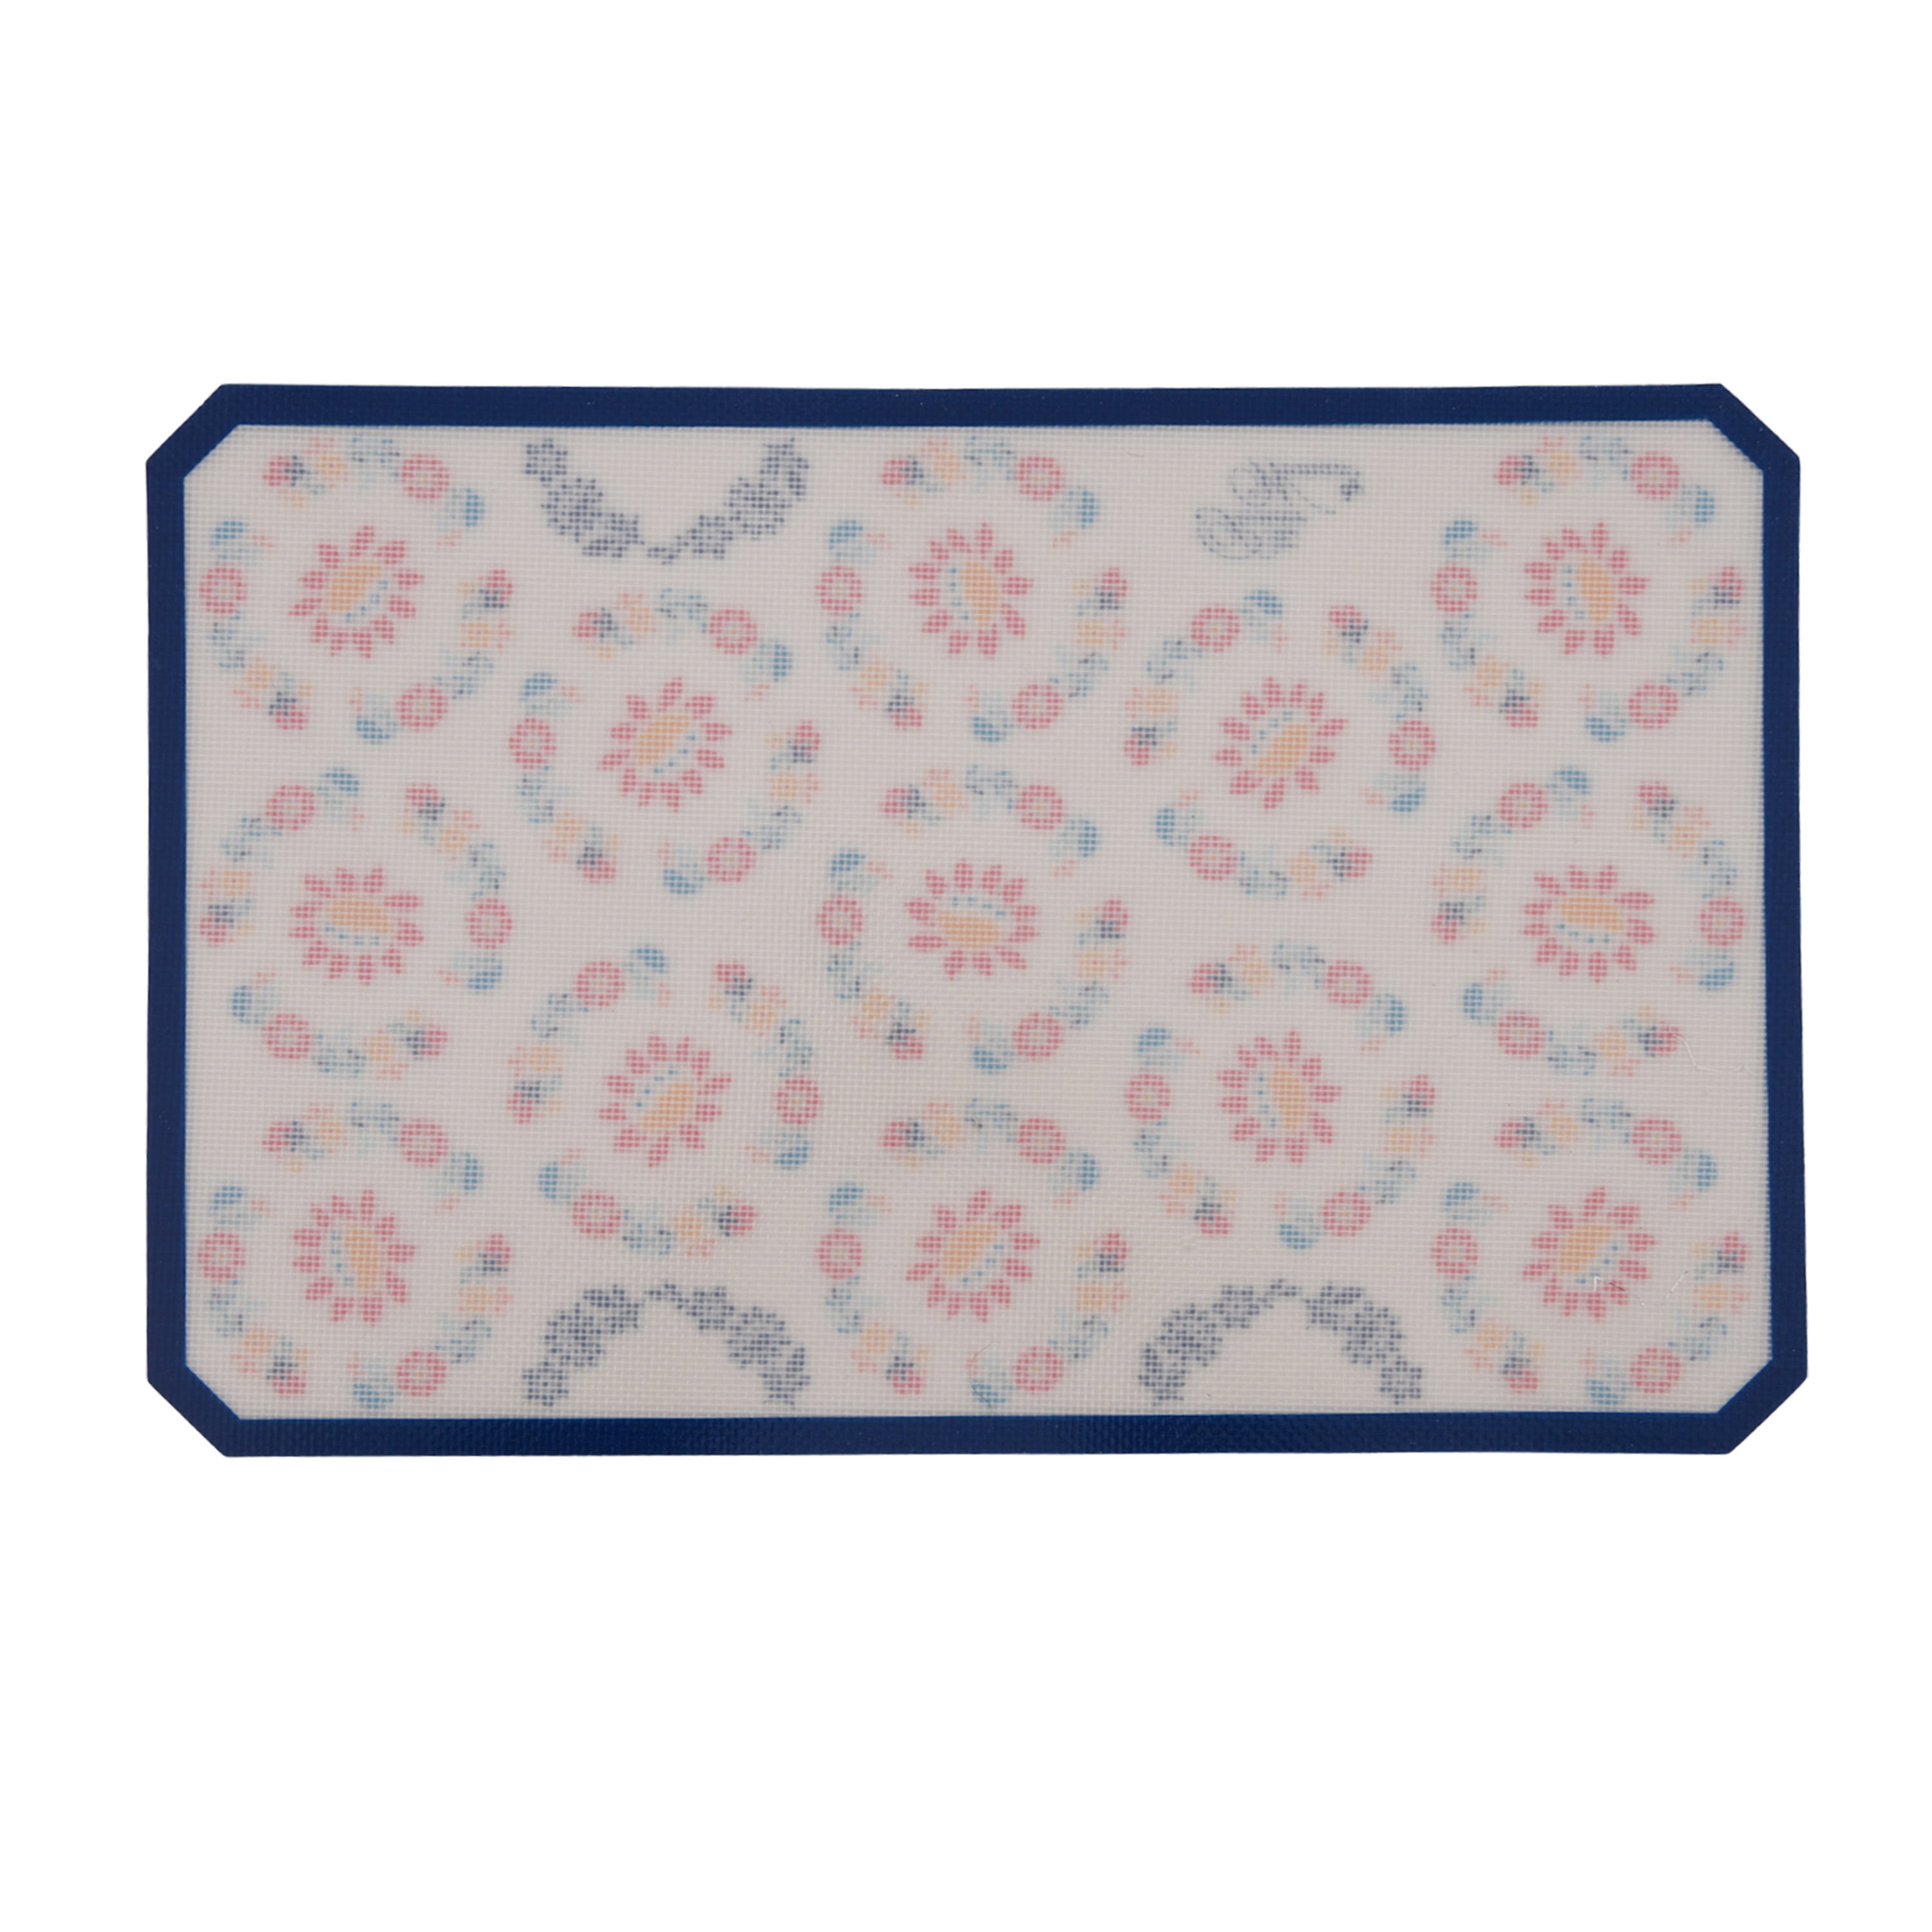 NEW PIONEER WOMAN SILICONE BAKING MAT ~ CHOOSE YOUR PATTERN!